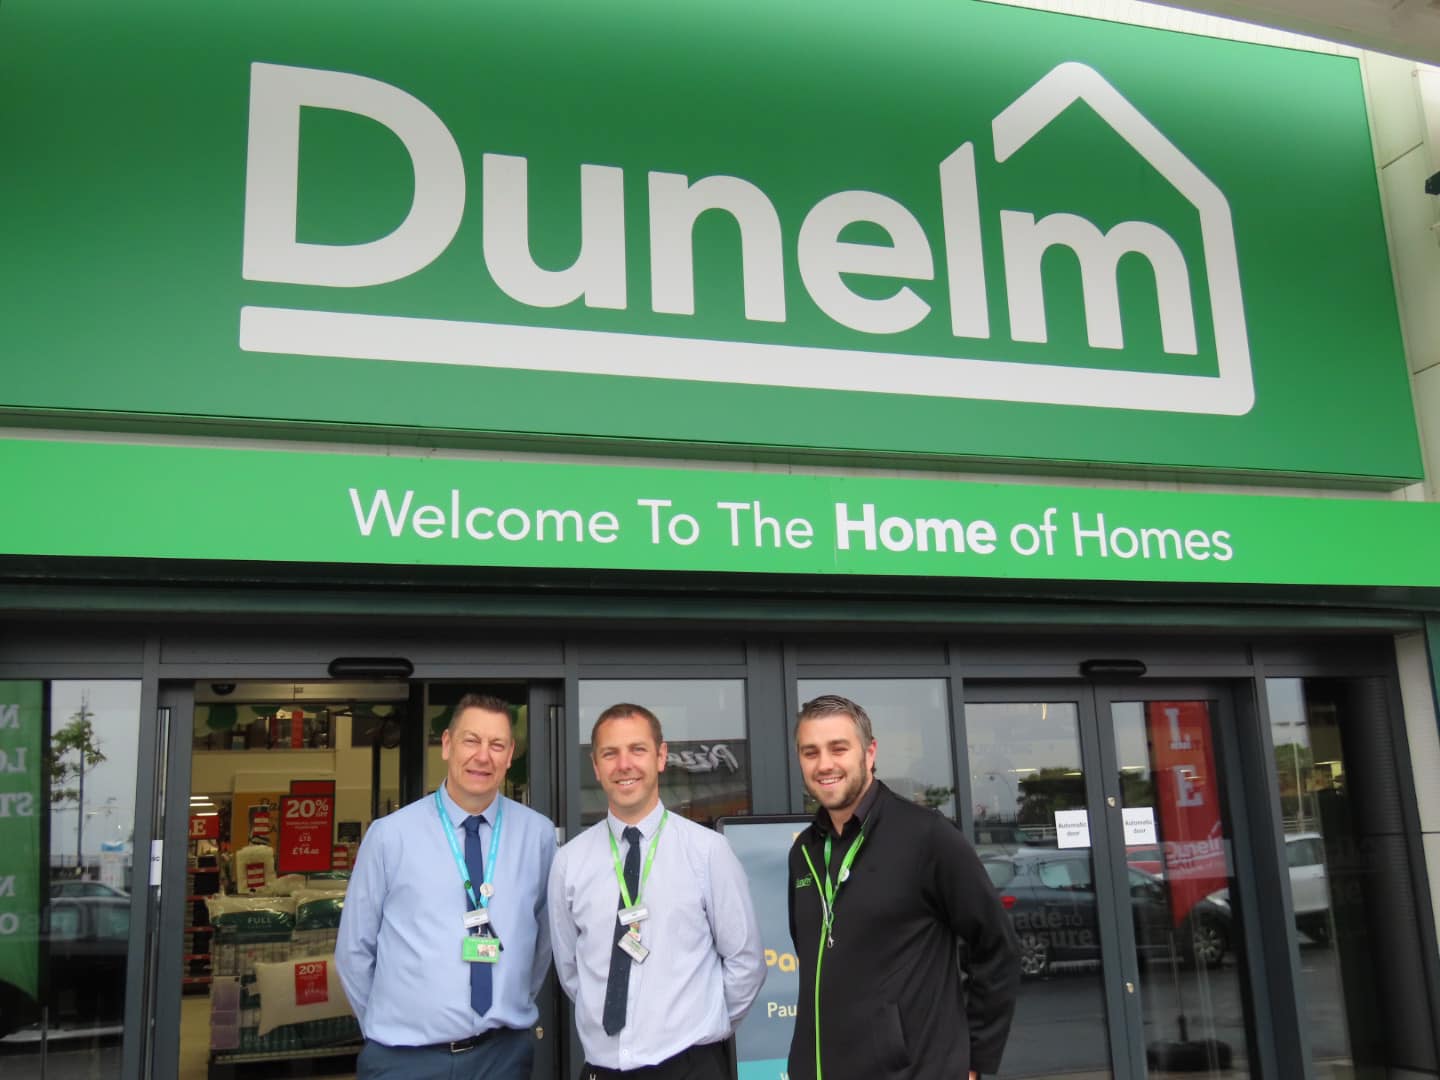 Leading homewares retailer Dunelm has relaunched its much anticipated, new look store in Southport